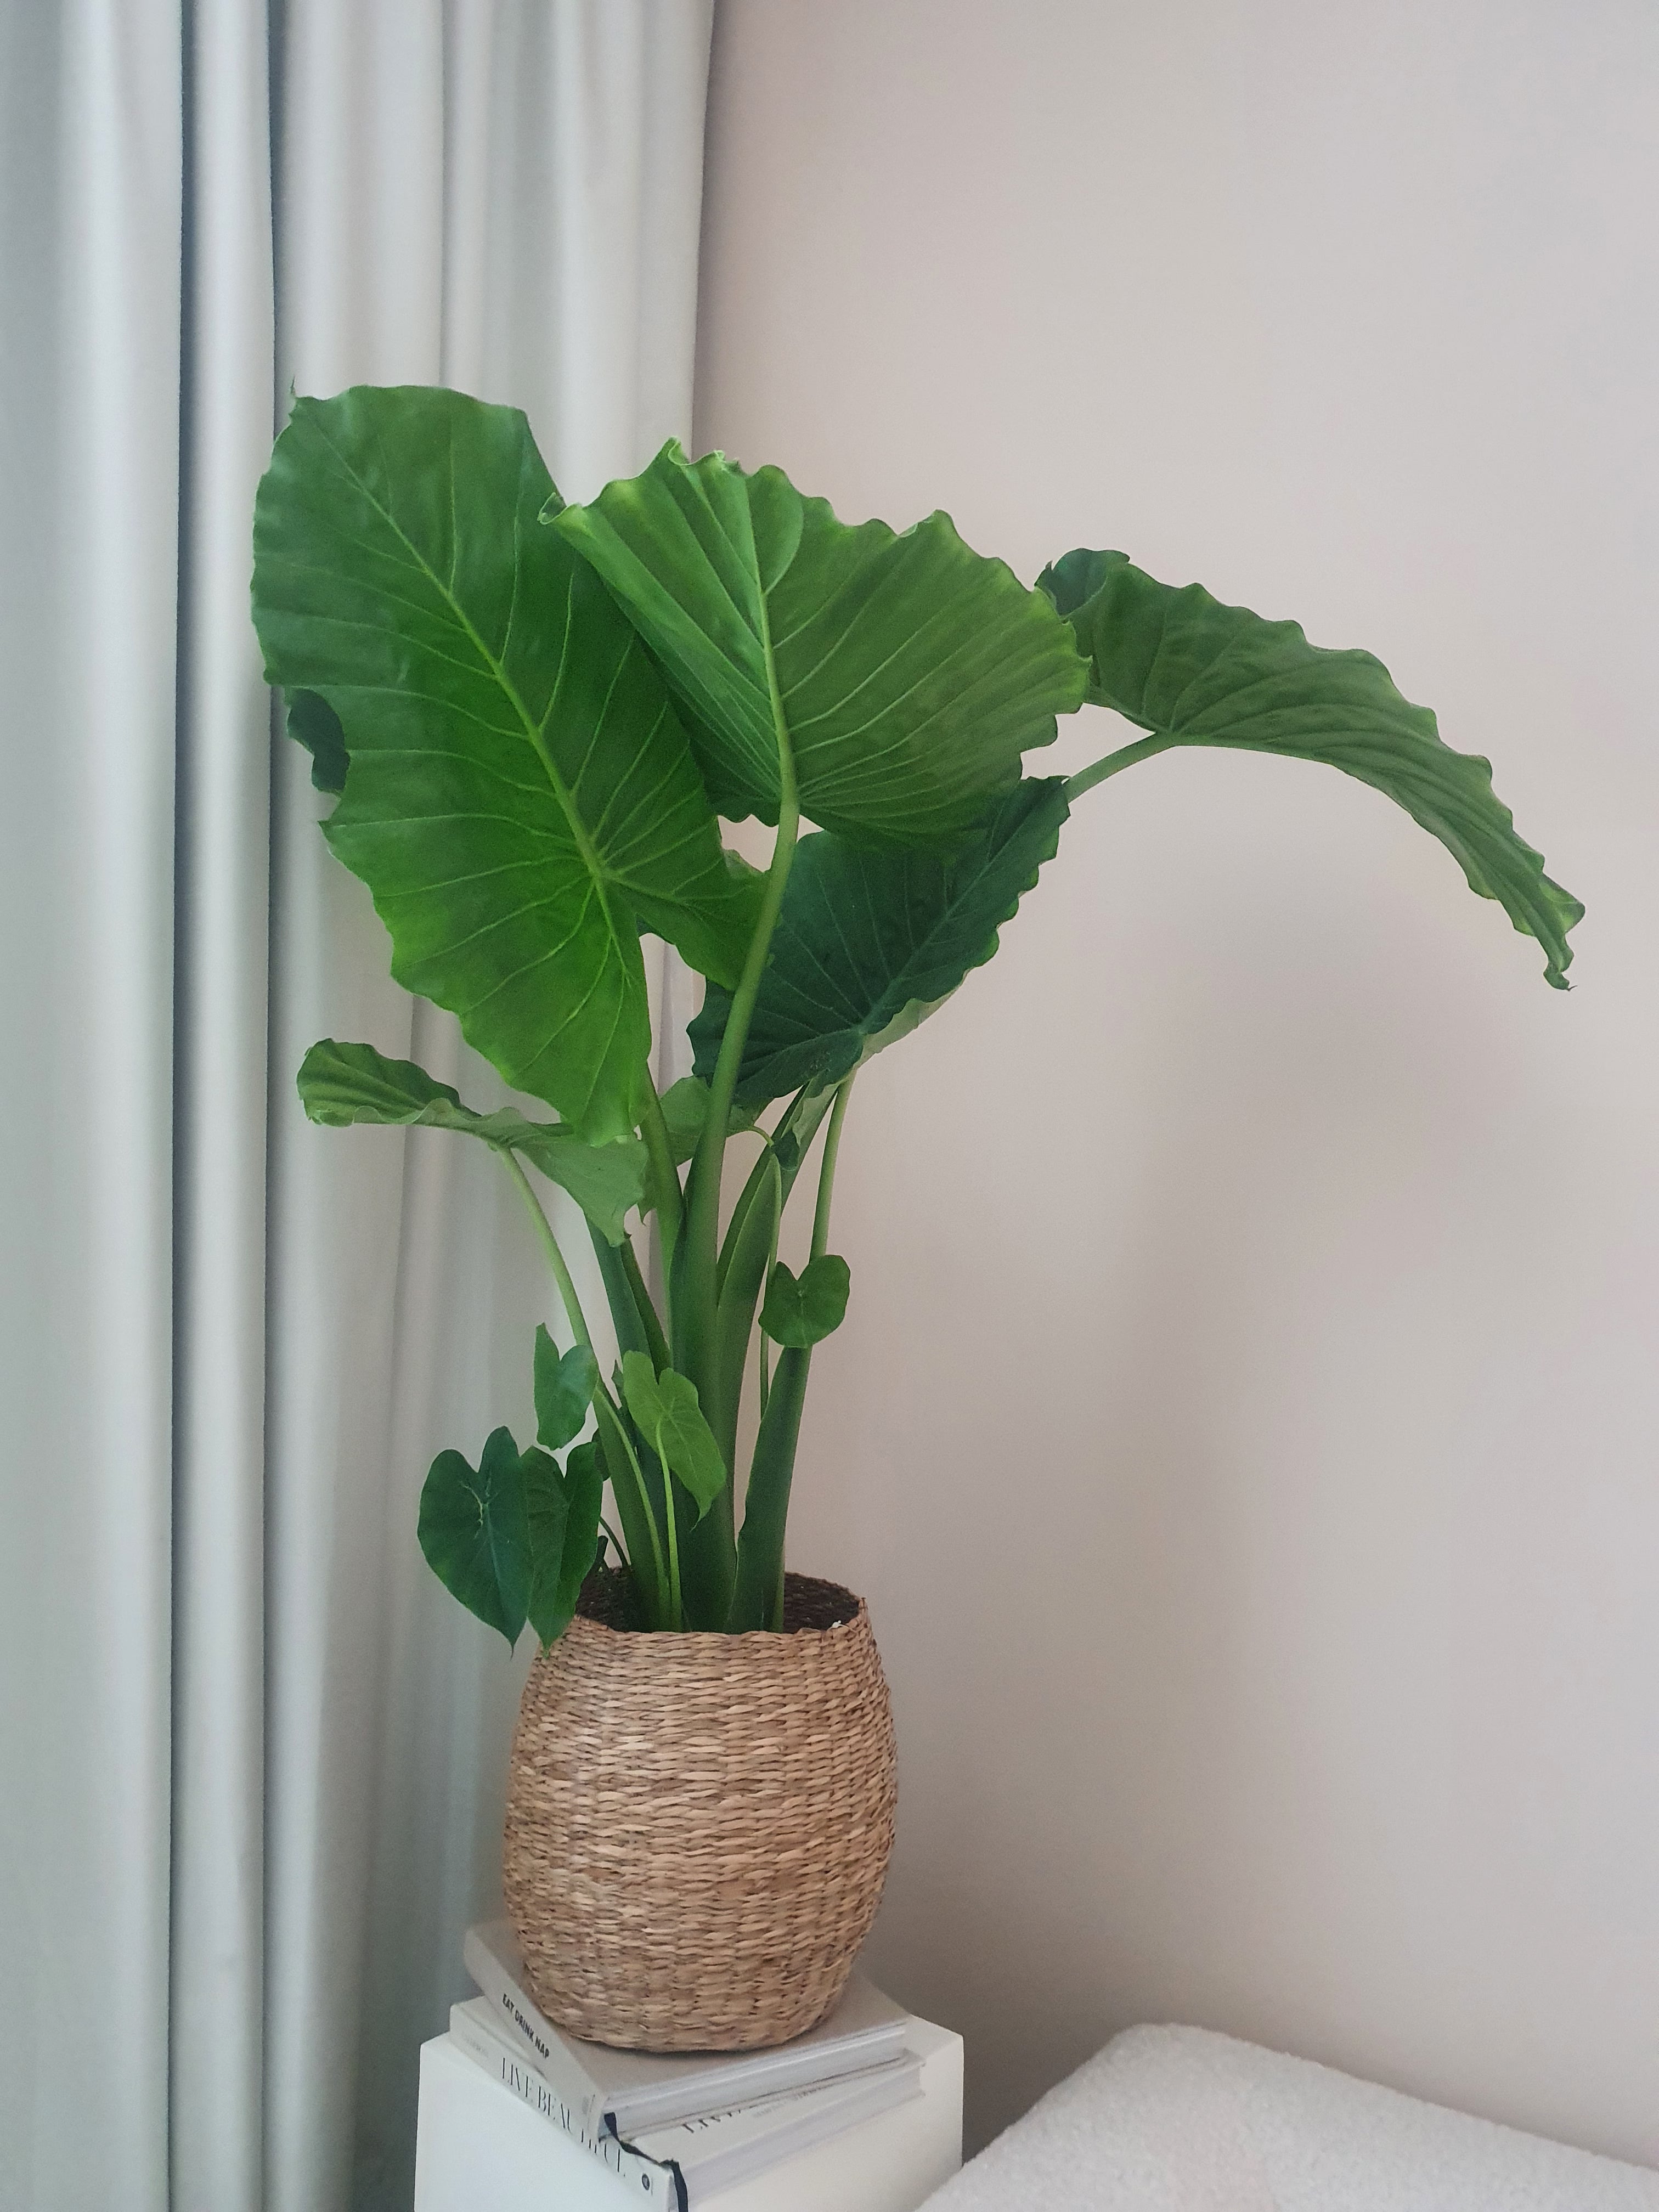 Alocasia Gageana in basket pot placed on top of books - Plant Studio LLC